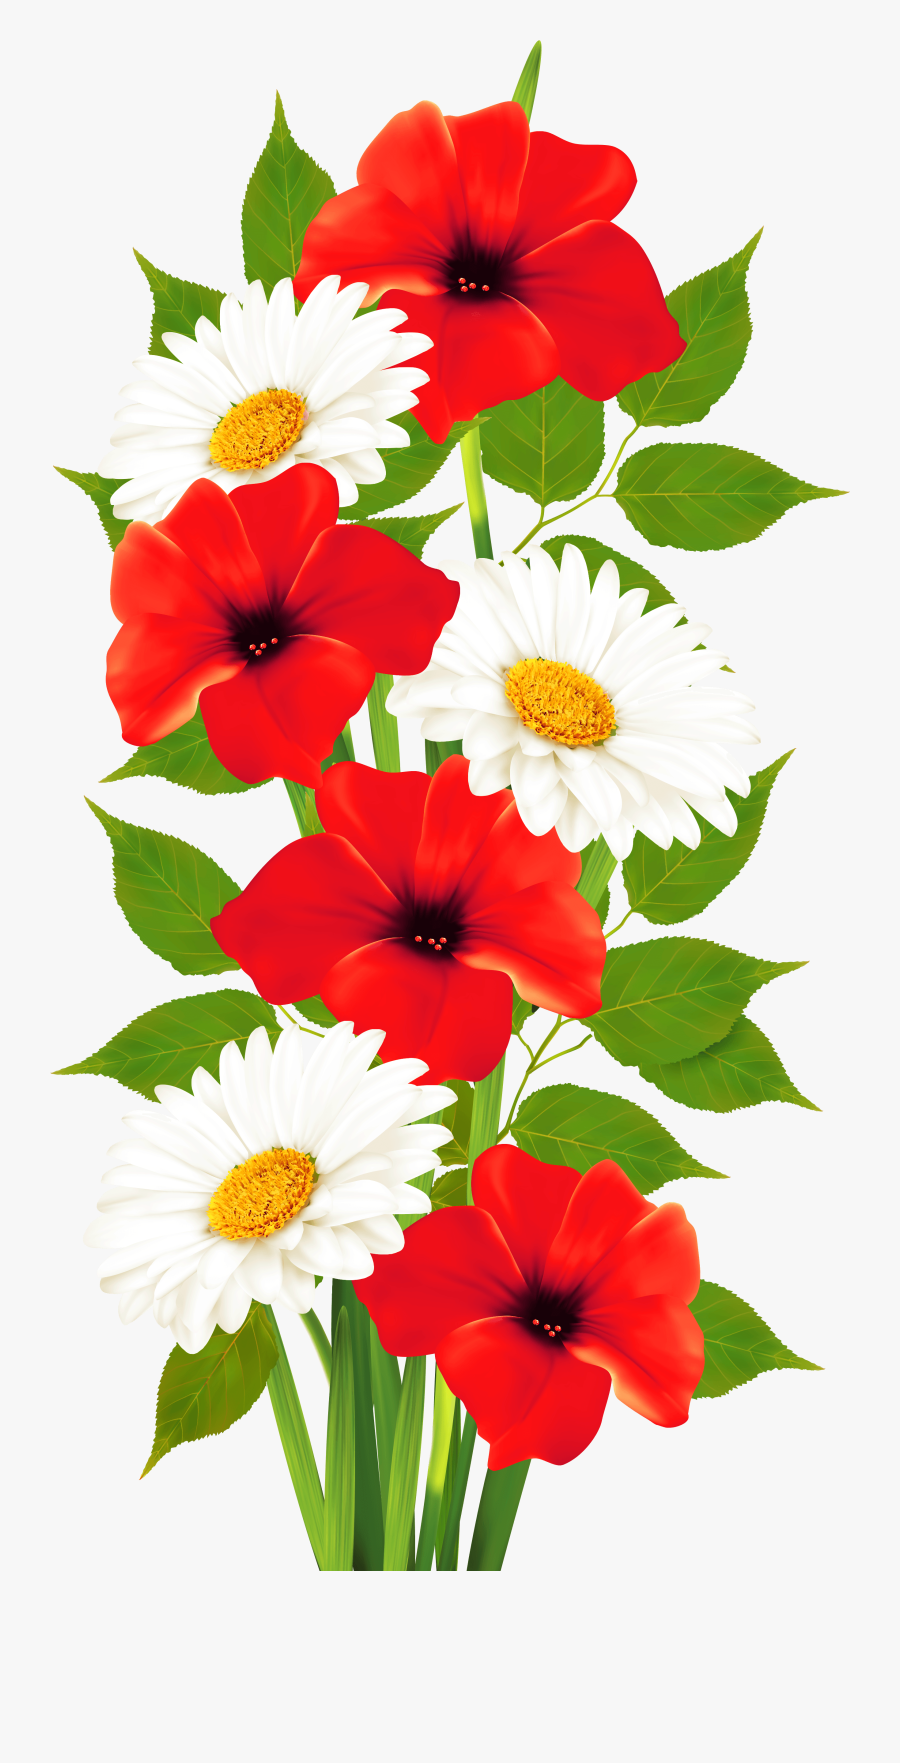 Poppies And Daisies Transparent Png Clipart - Transparent Background Flower Clipart, Transparent Clipart